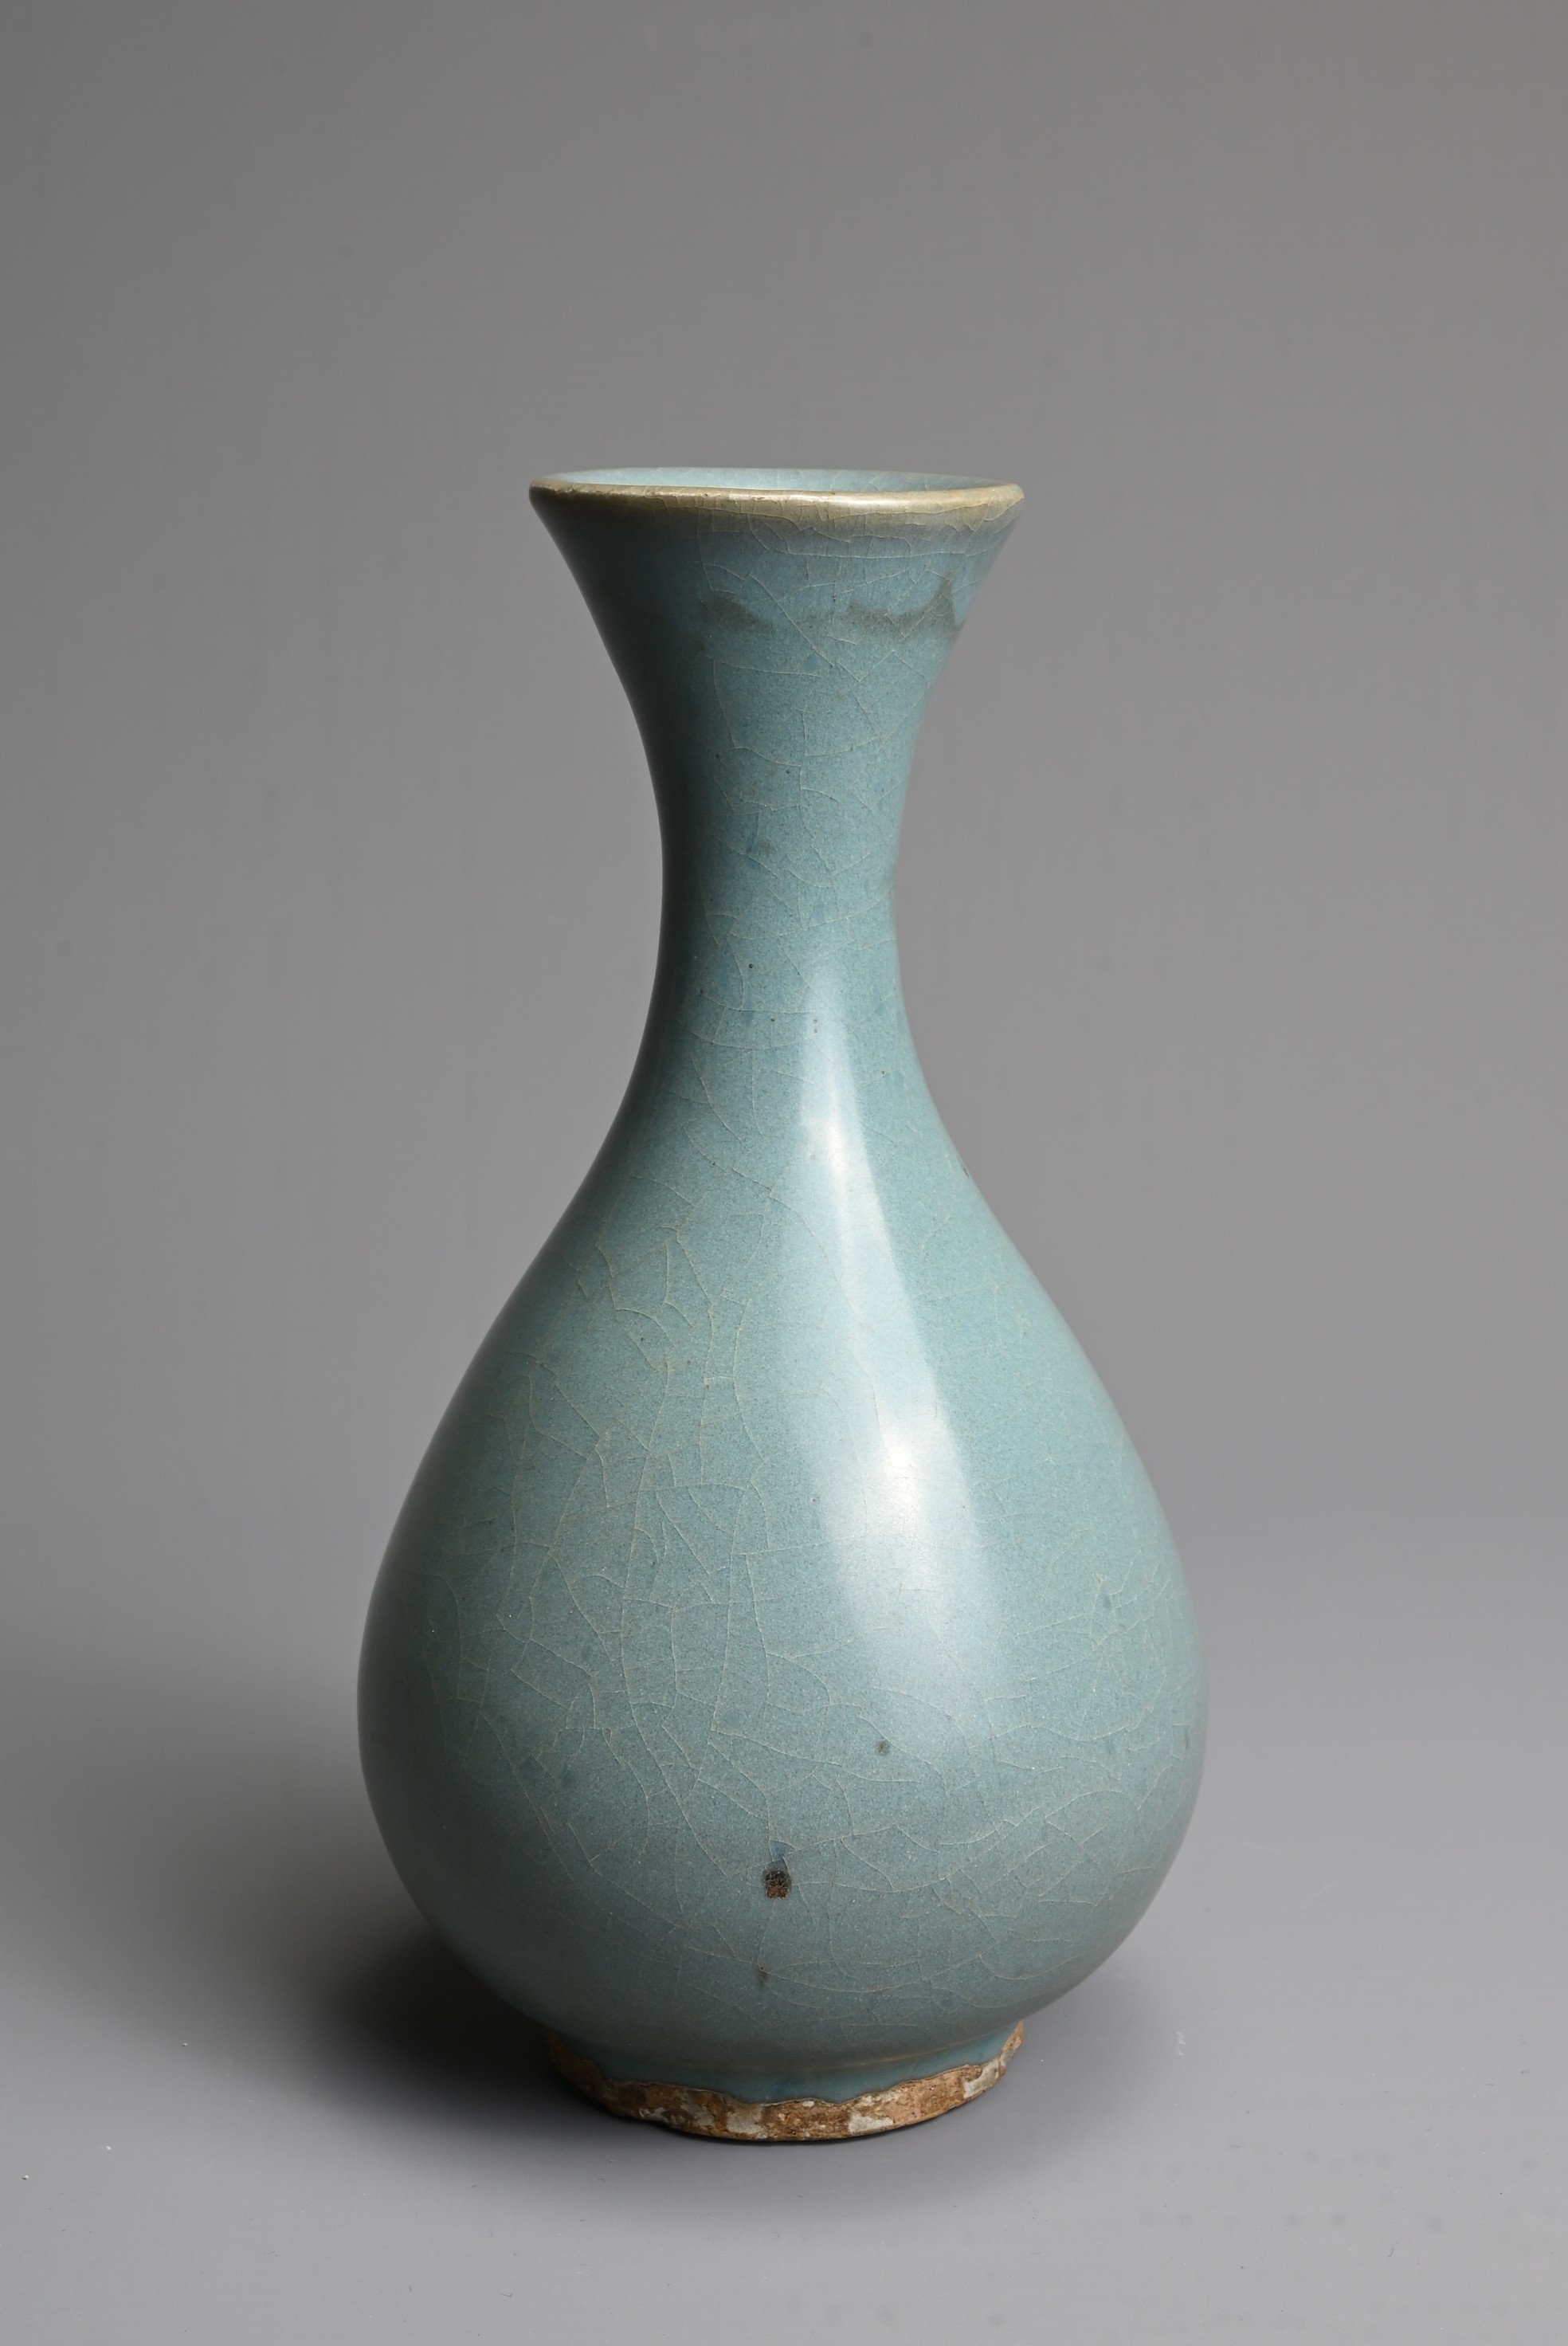 A CHINESE JUN TYPE BOTTLE VASE, SONG / YUAN DYNASTY. Pear shaped bottle with flared rim covered in a - Image 3 of 7